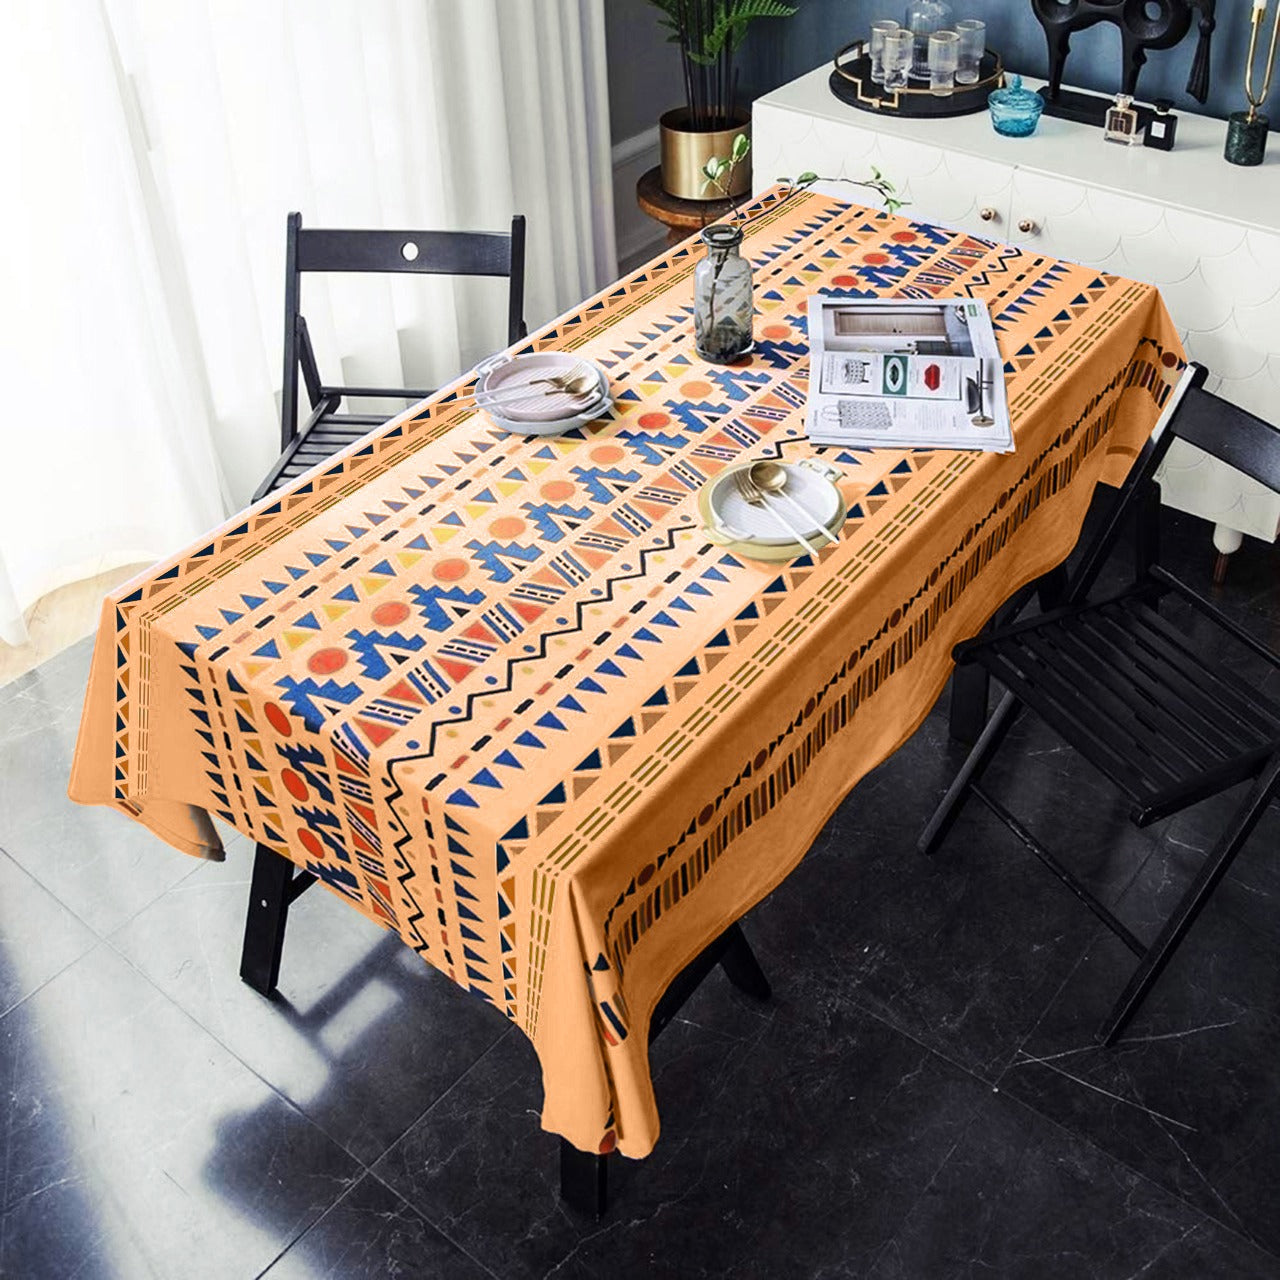 6 & 8 Seater Digital Printed Table Cover-TB24 Apricot